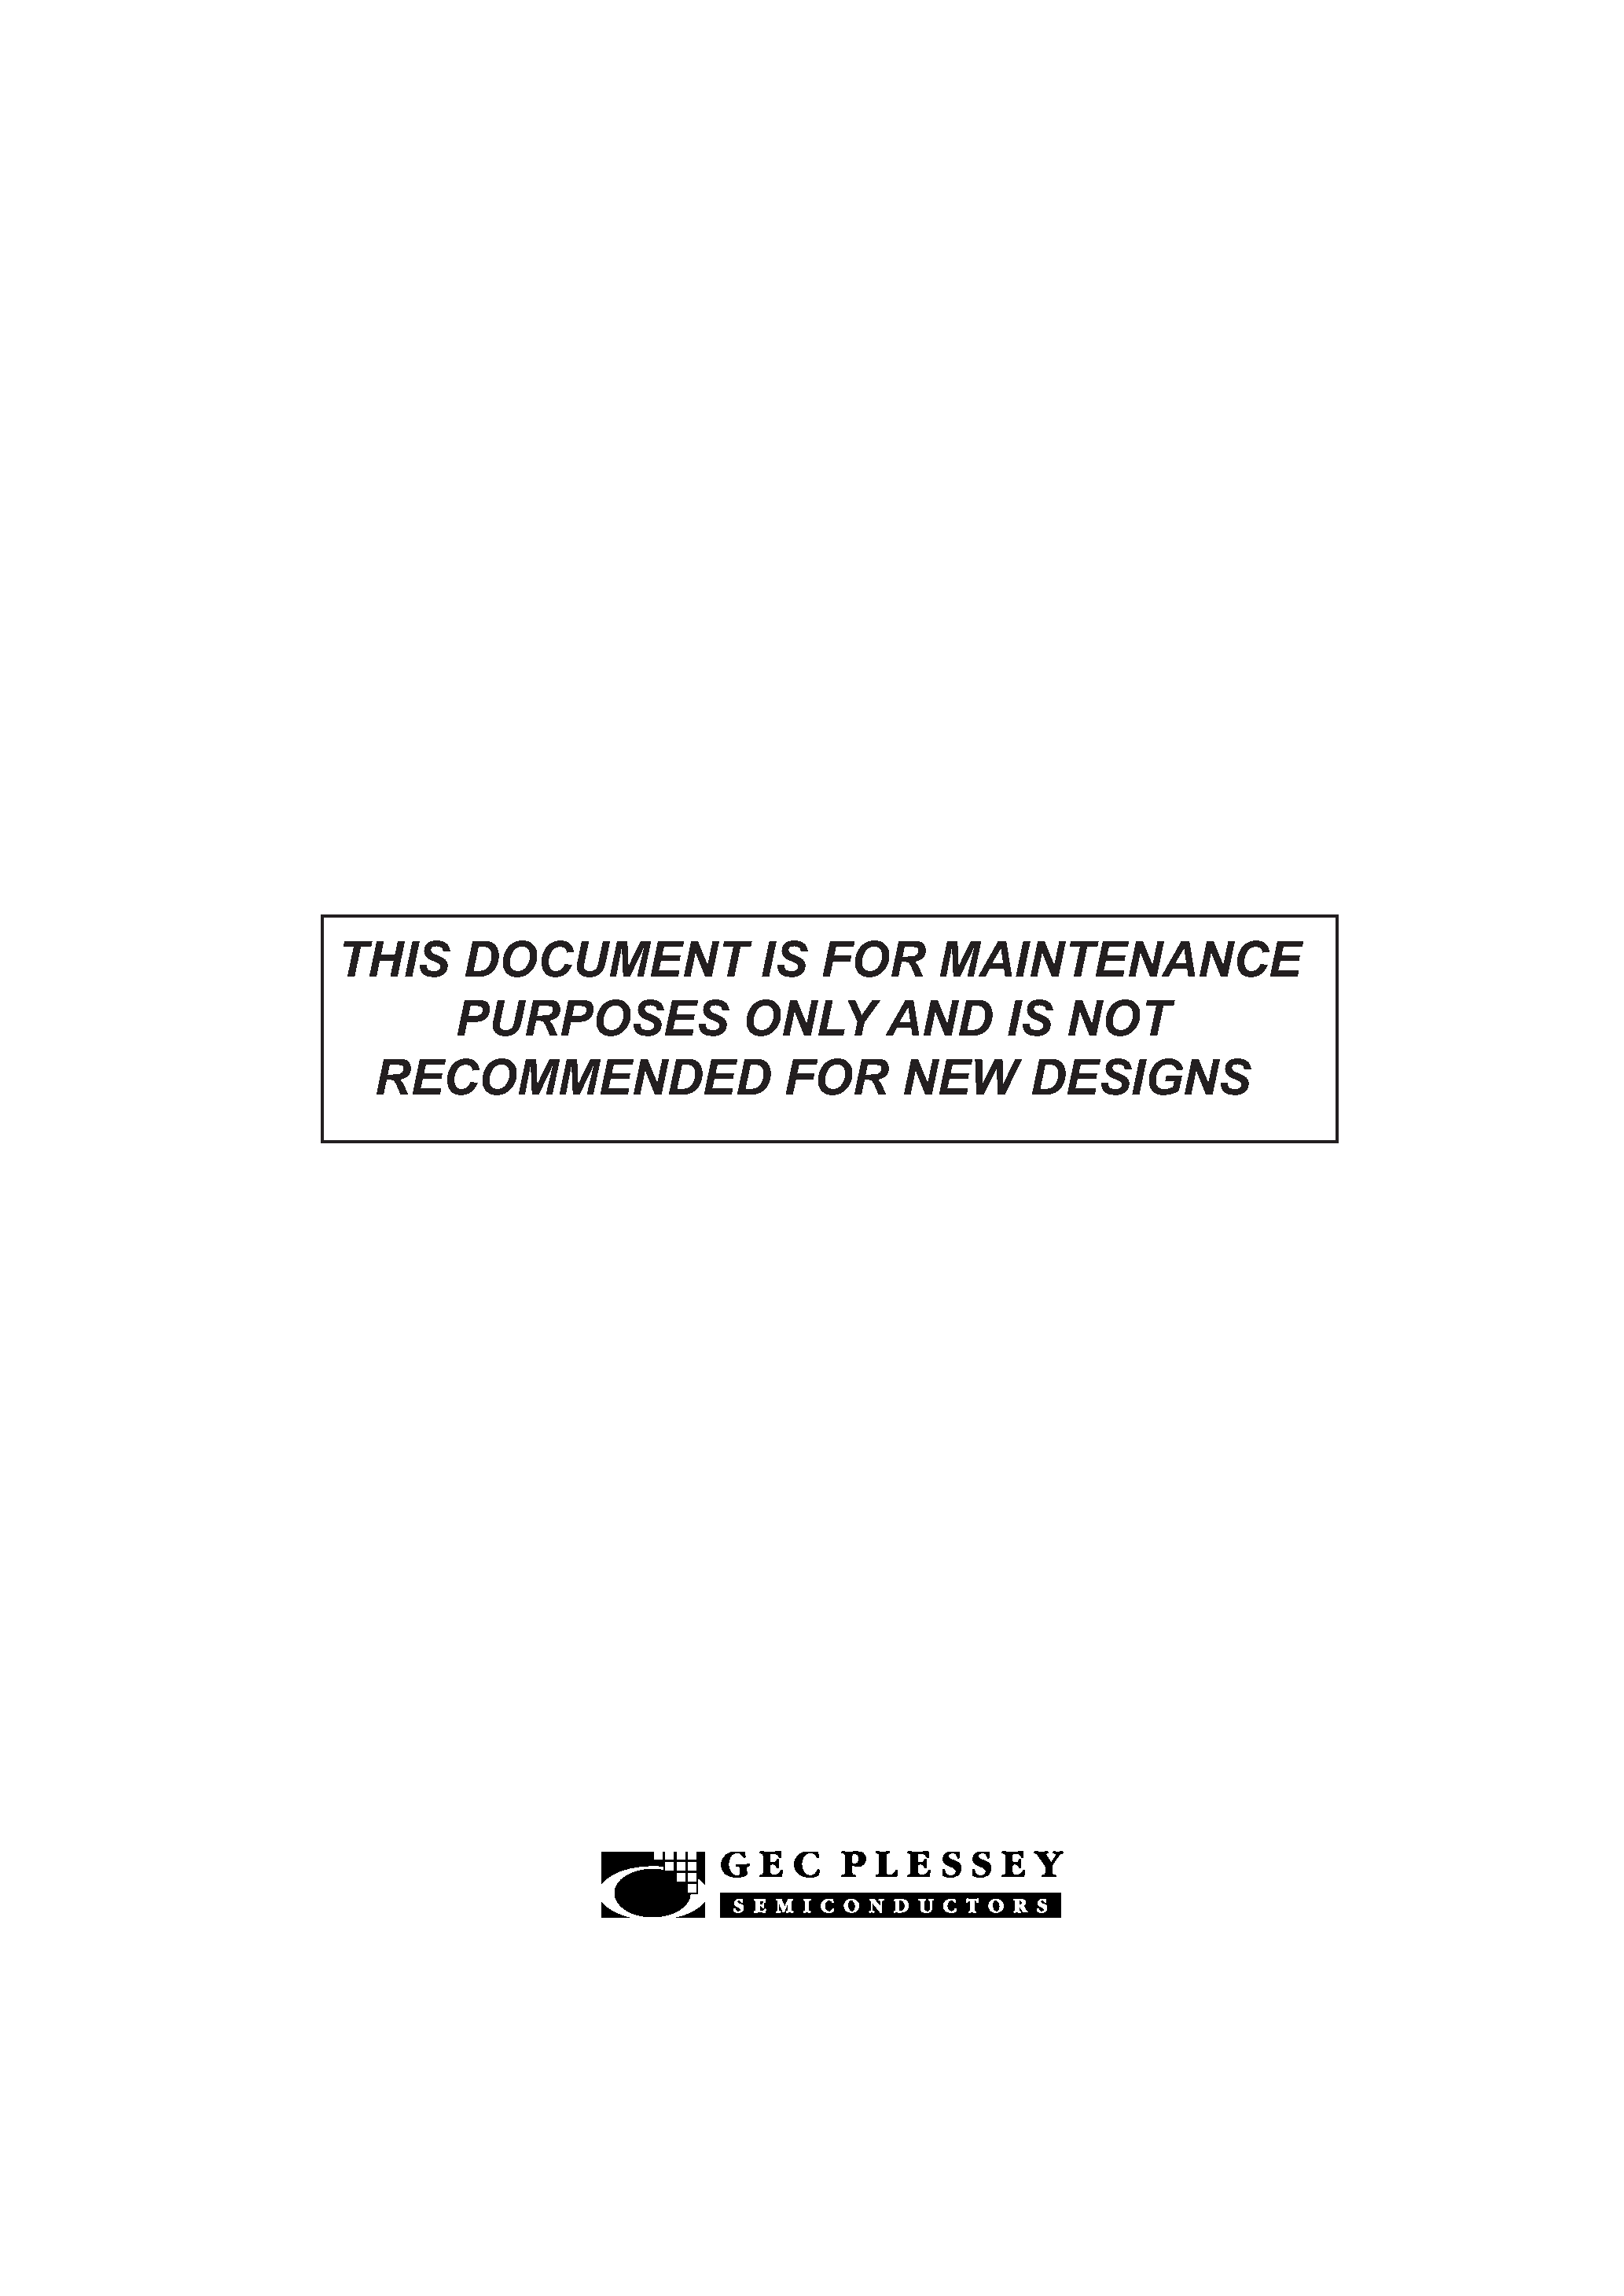 Datasheet SL1640 - THIS DOCUMENT IS FOR MAINTENANCE PURPOSES ONLY AND IS NOT RECOMMENDED FOR NEW DESIGNS page 1